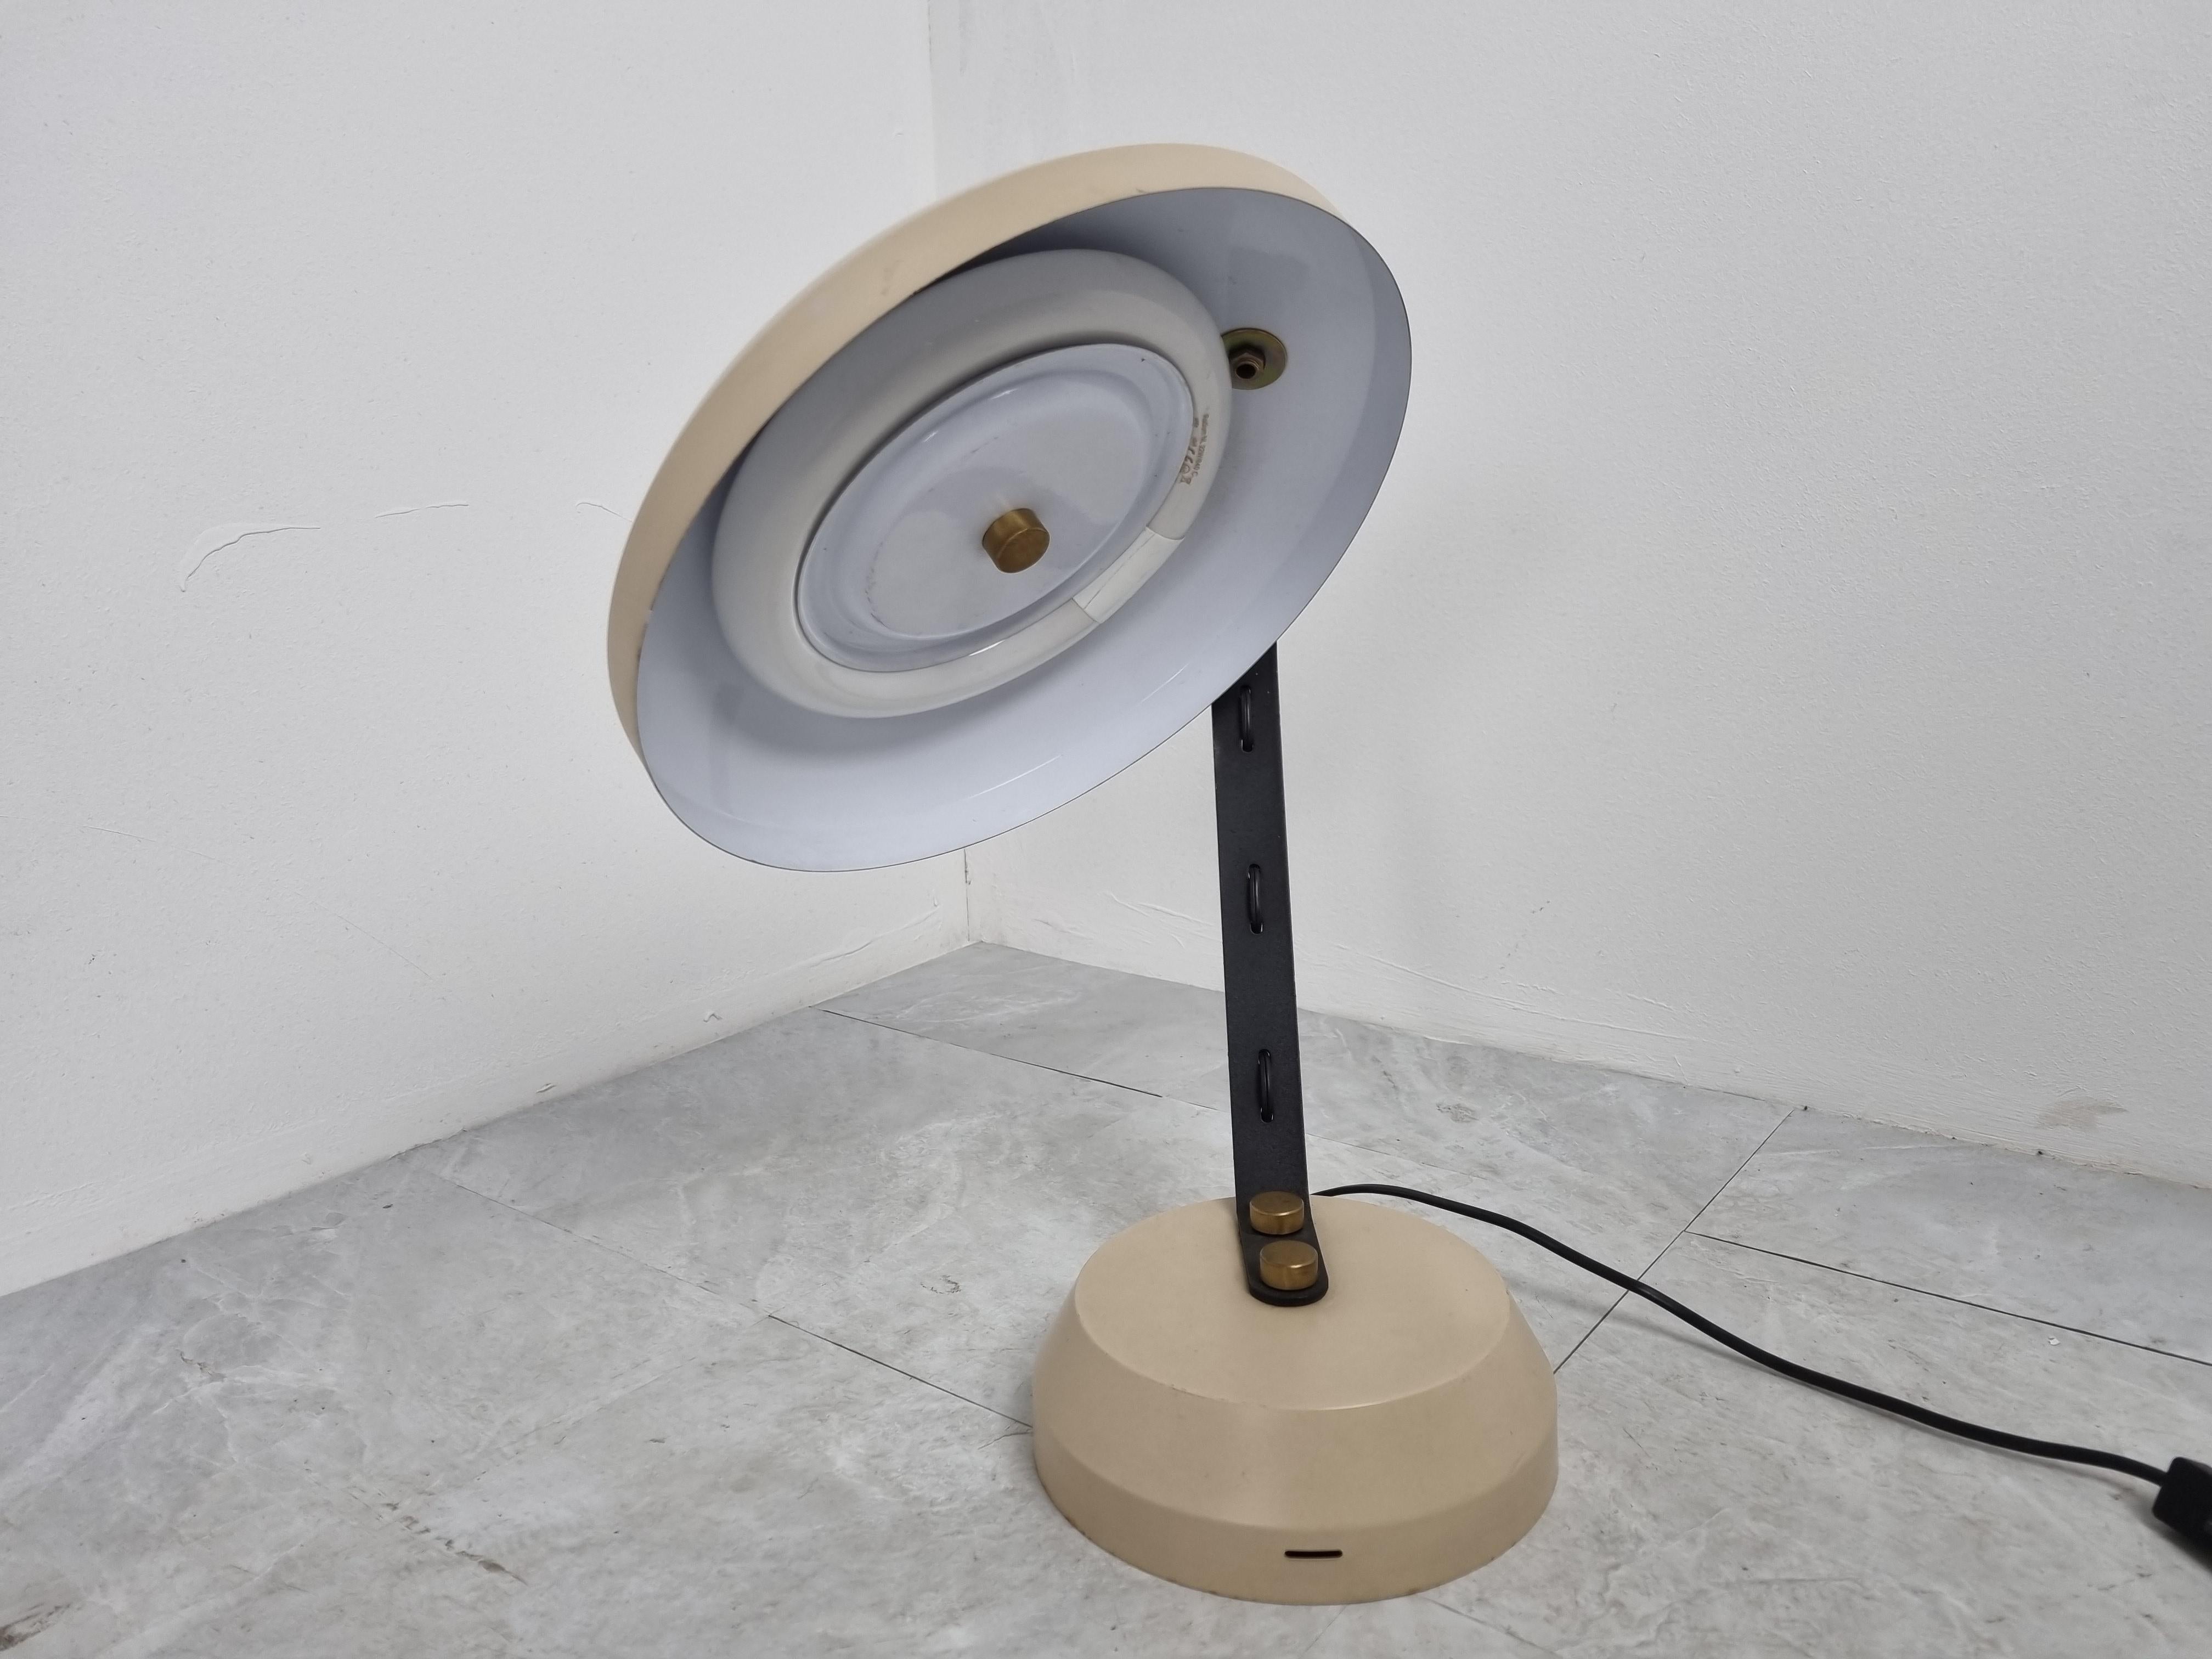 Vintage adjustable desk lamp with a neon light bulb.

Beige and black metal base and lamp shade with brass details.

Nice quality desk lamp from the seventies which is very adjustable, so the ideal desk lamp. It also emits plenty of